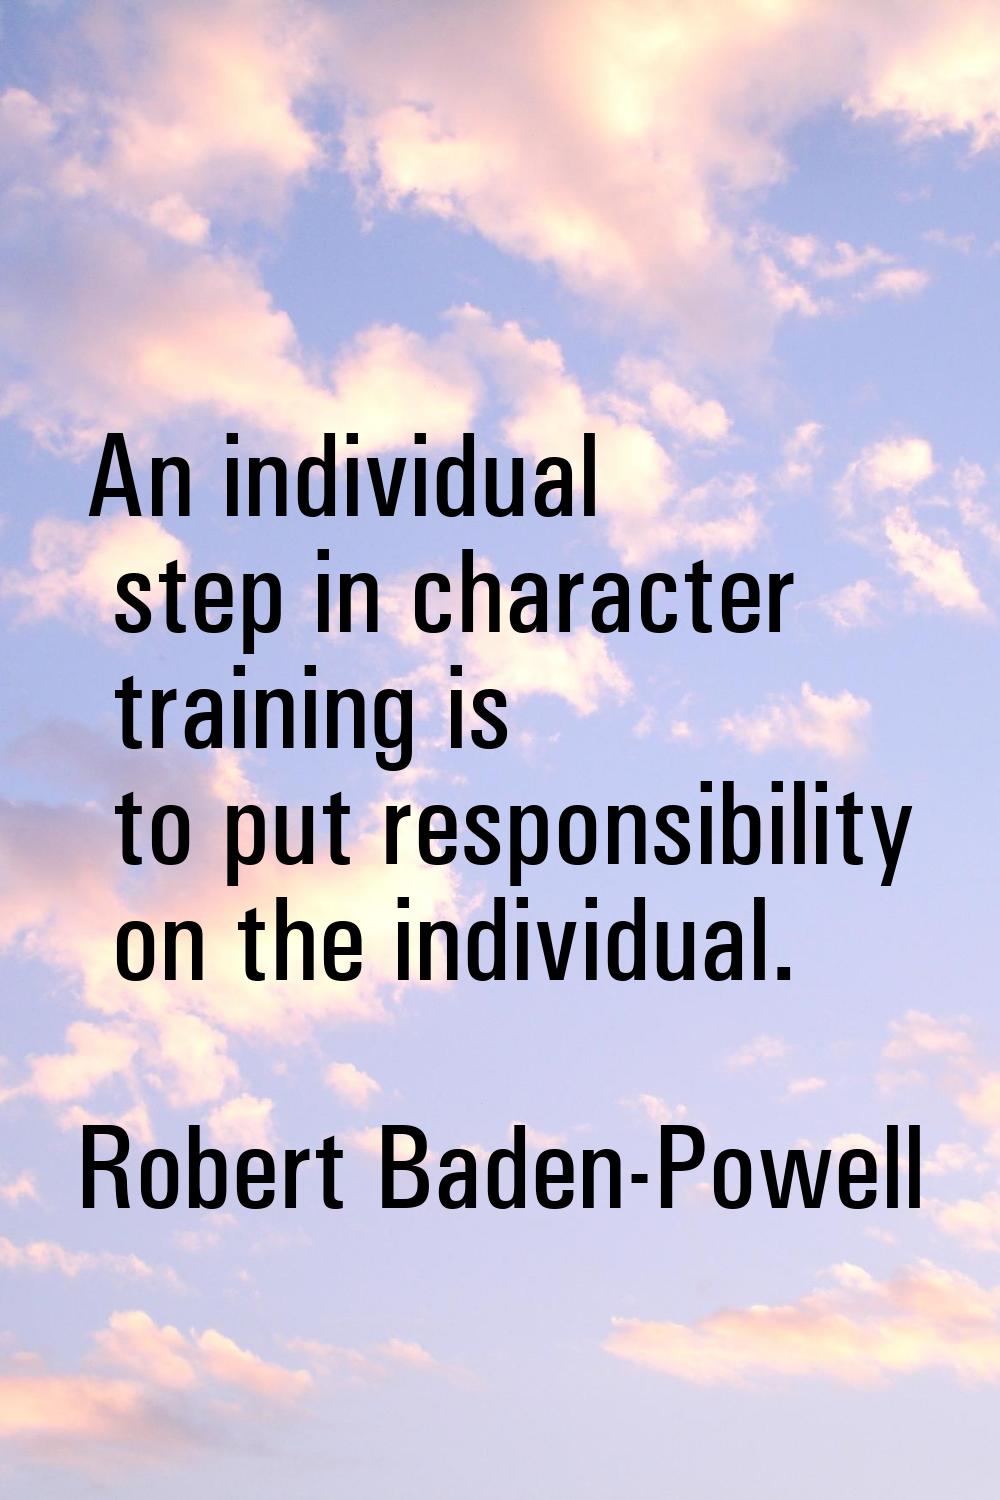 An individual step in character training is to put responsibility on the individual.